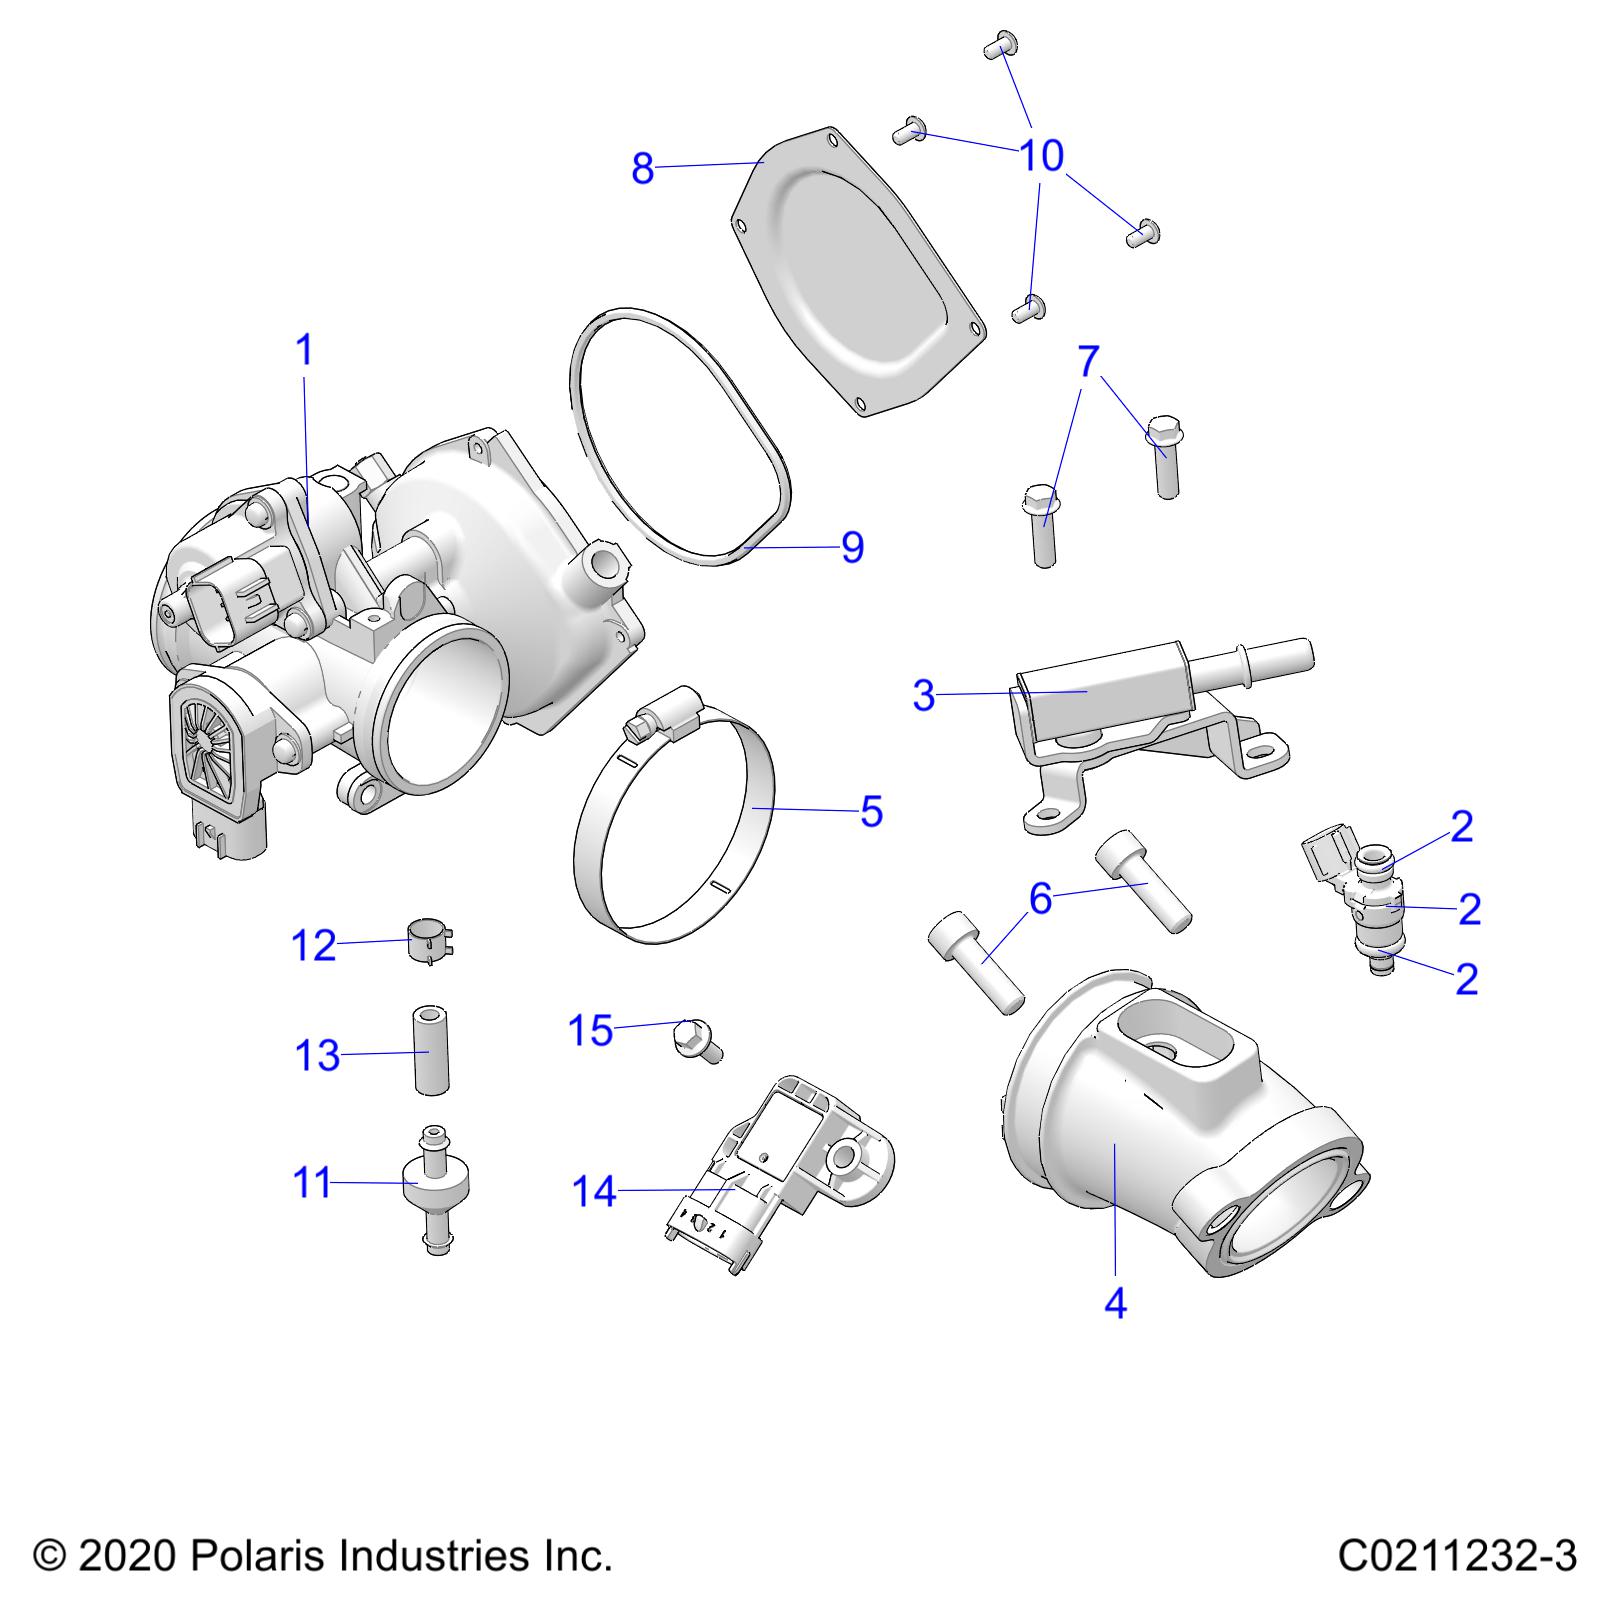 Part Number : 5143694 ADAPTER-OIL FILTER MACH